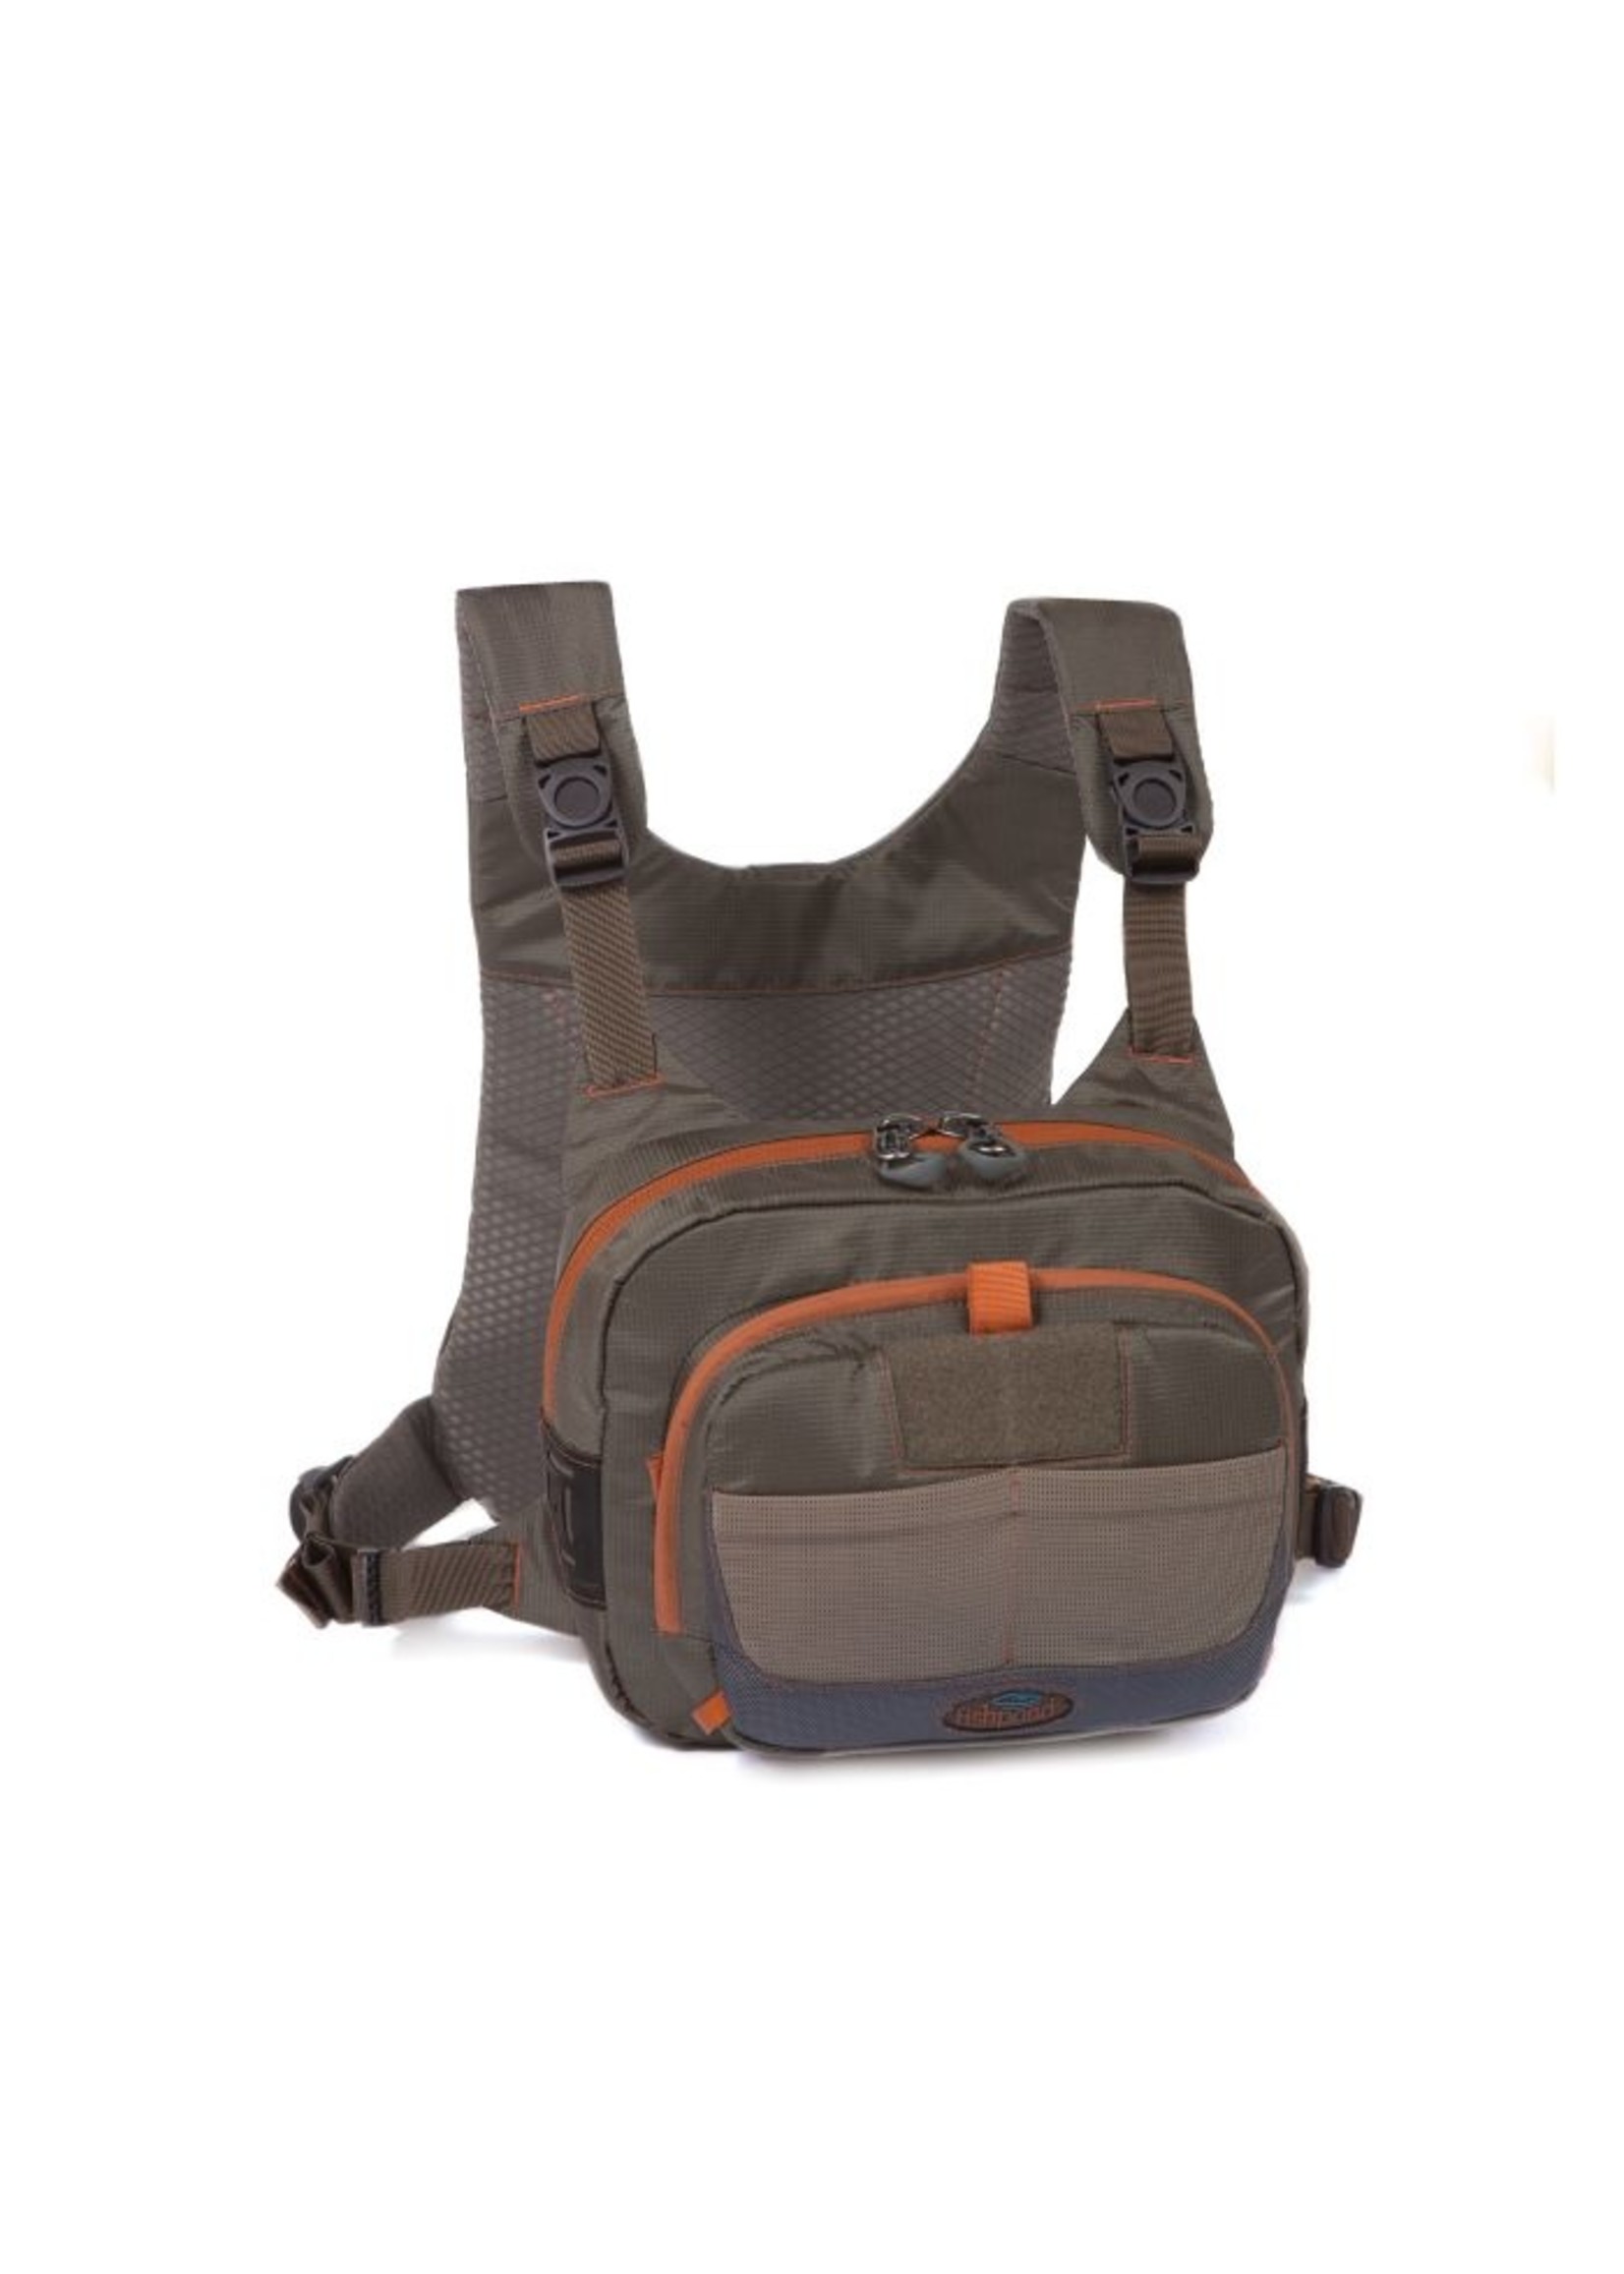 Fishpond Fishpond Cross-Current Chest Pack